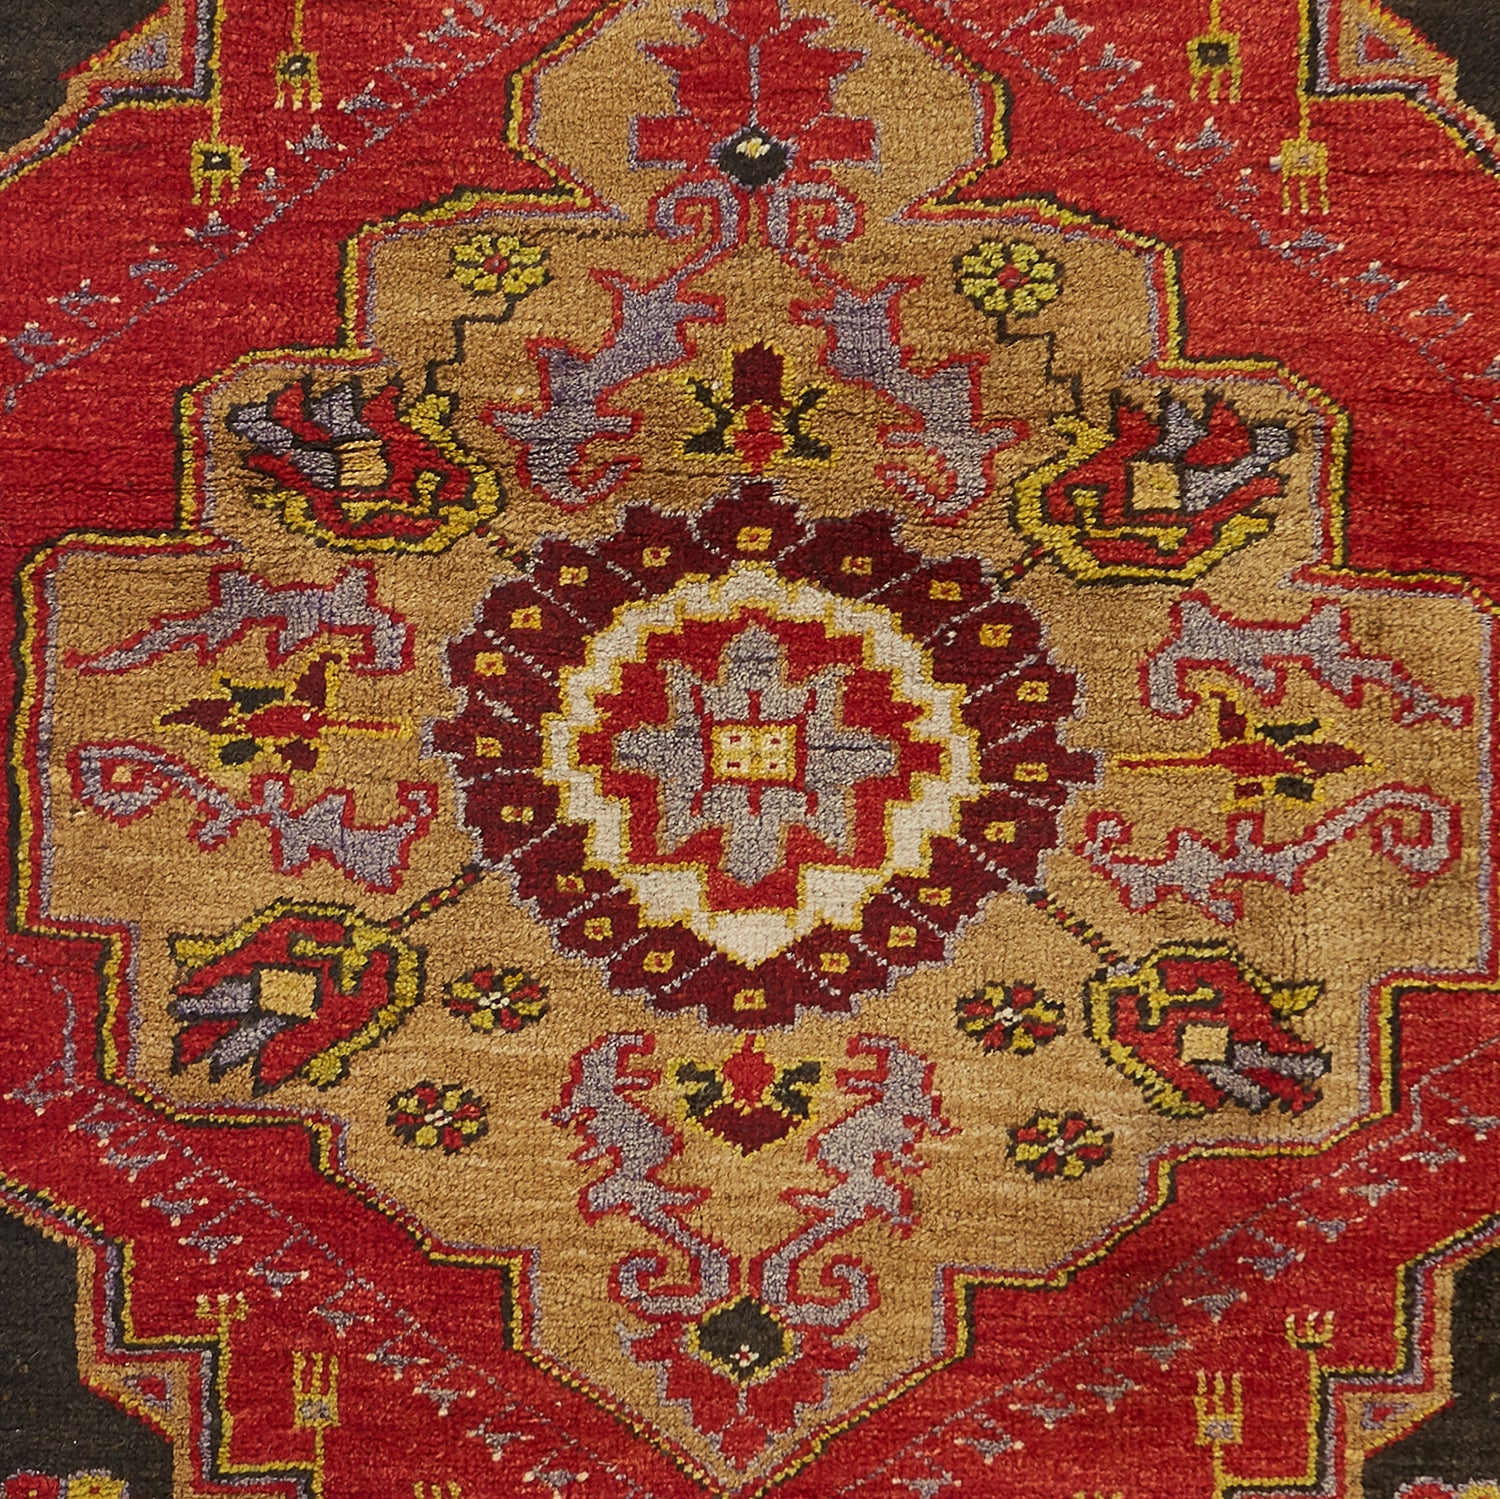 Exquisite traditional rug with intricate patterns and rich colors.